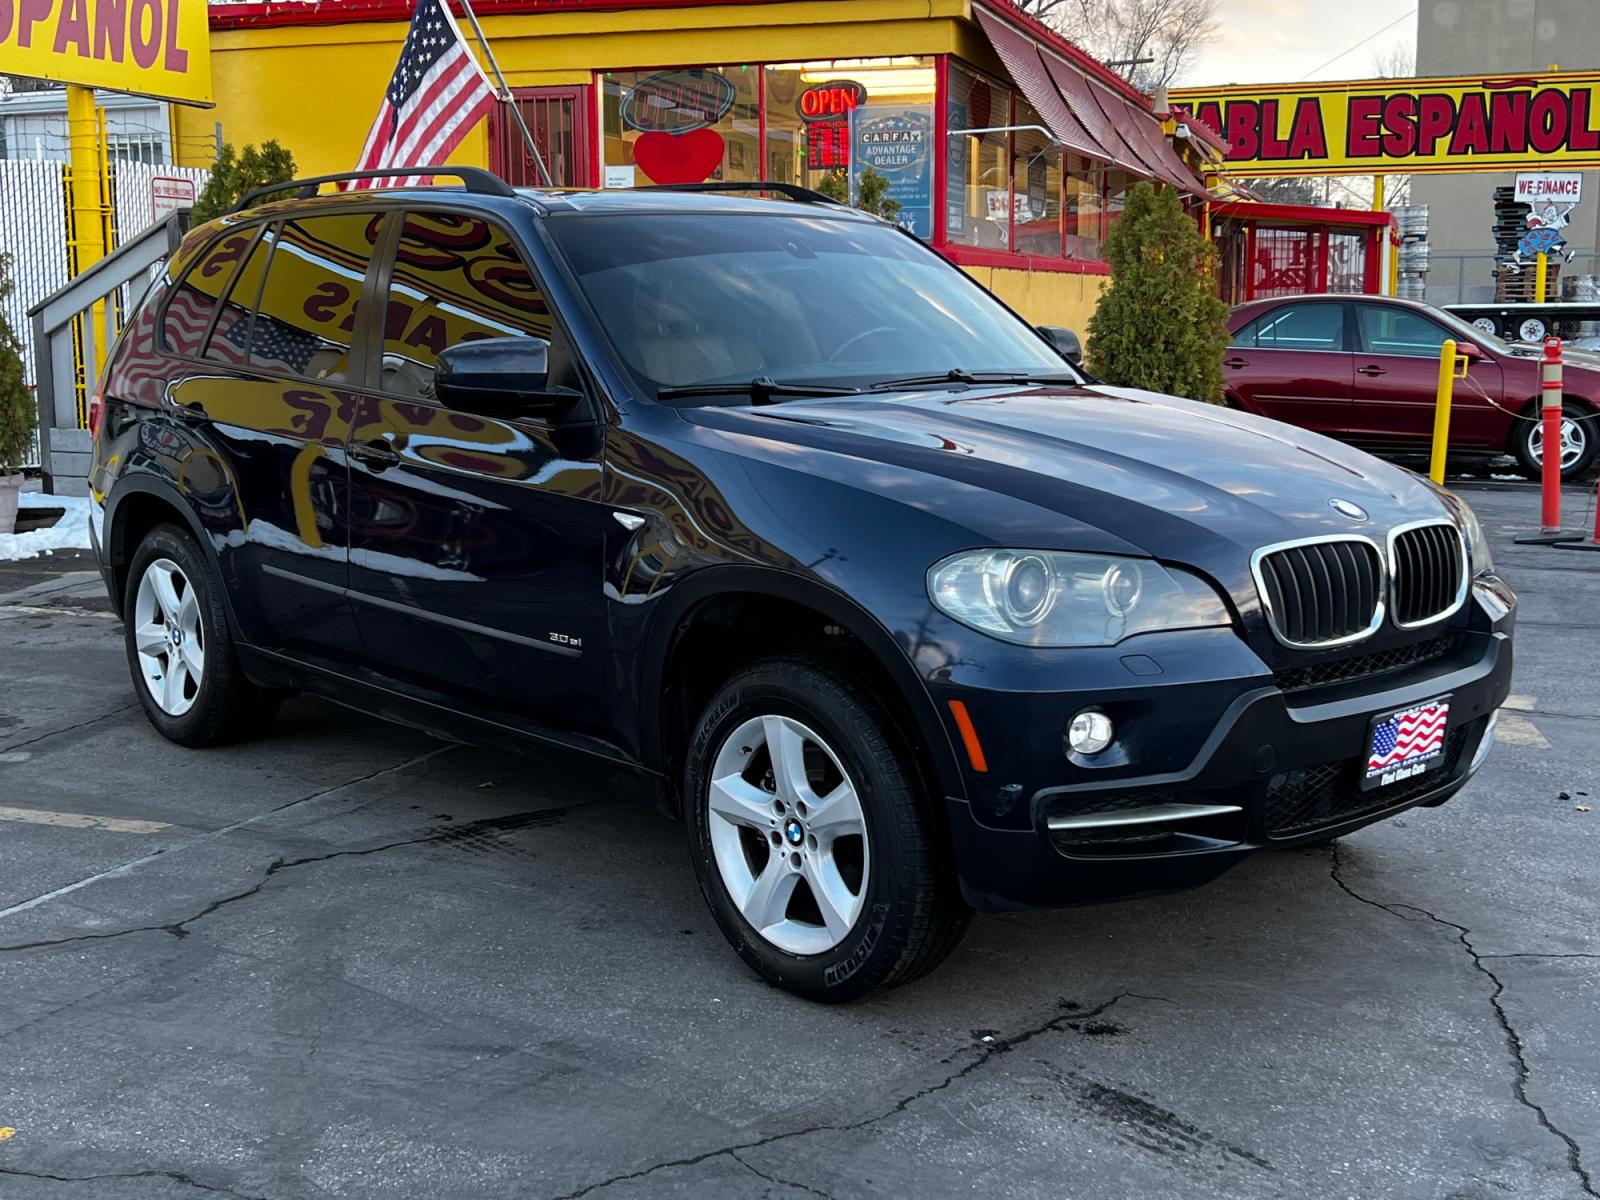 2007 Toledo Blue Metallic /Tan Leather BMW X5 3.0si (5UXFE43547L) with an 3.0L I6 engine, Automatic transmission, located at 801 South State Street, Salt Lake City, UT, 84111, (801) 328-0098, 40.751953, -111.888206 - Life is crazy. Now is the time to buy! All of our prices are just dollars above our cost. These prices will change as soon as life isn't so crazy. So please call or come in. We are here to save you a lot of money! Our service department is OPEN DAILY to help with any of your service need - Photo #4